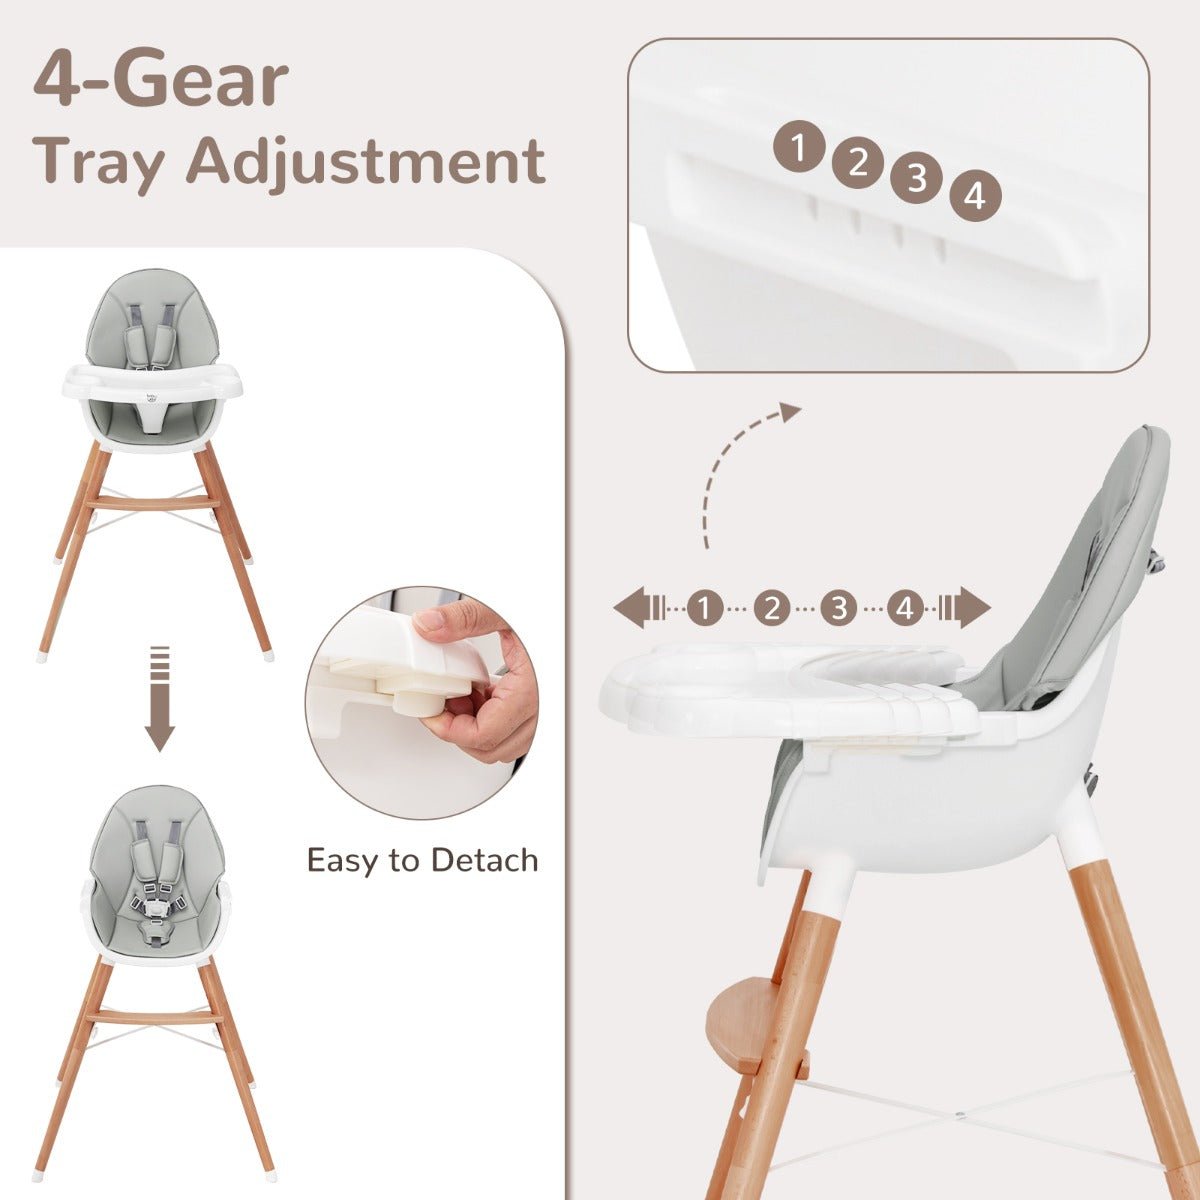 Adjustable Tray Feature